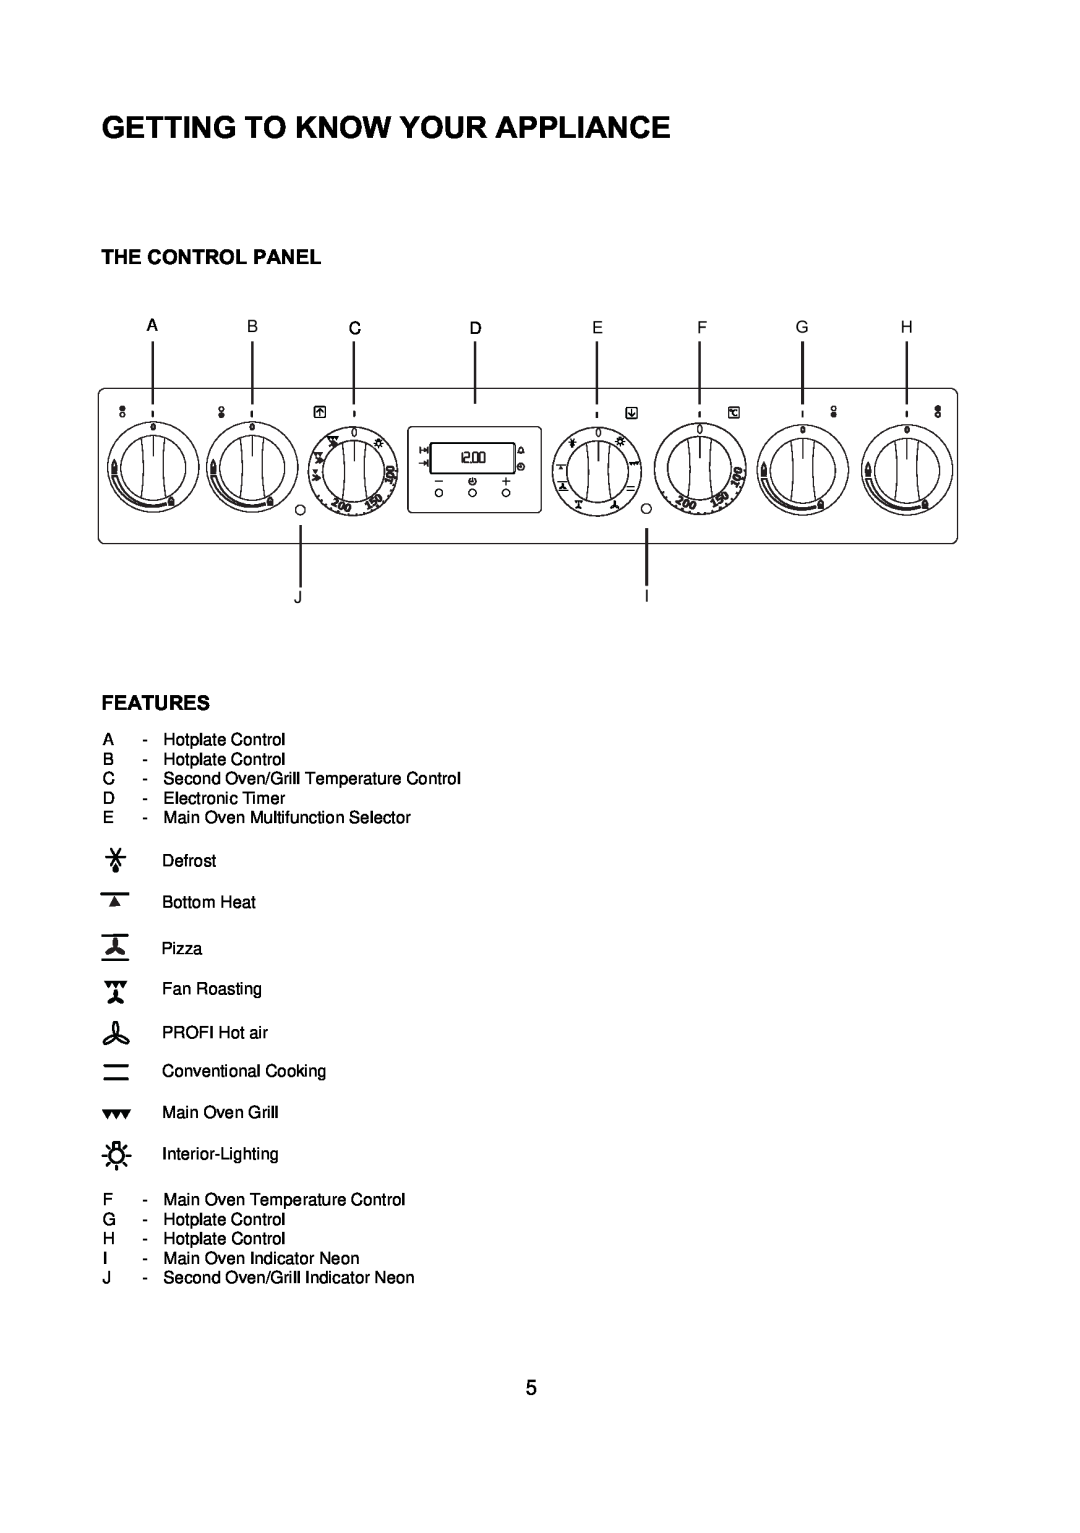 Electrolux D77000 user manual Getting To Know Your Appliance, The Control Panel, Features 